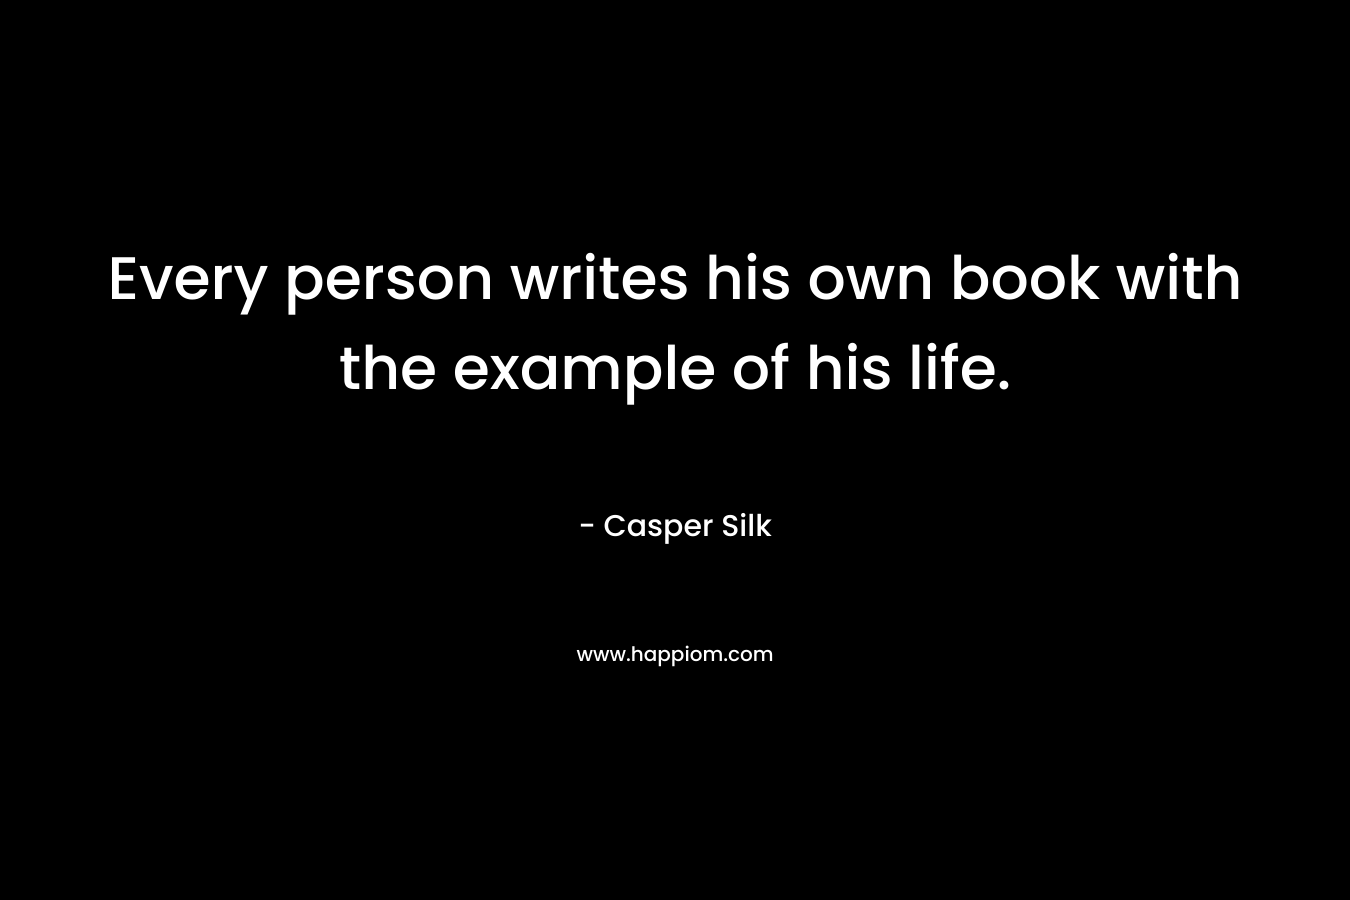 Every person writes his own book with the example of his life.